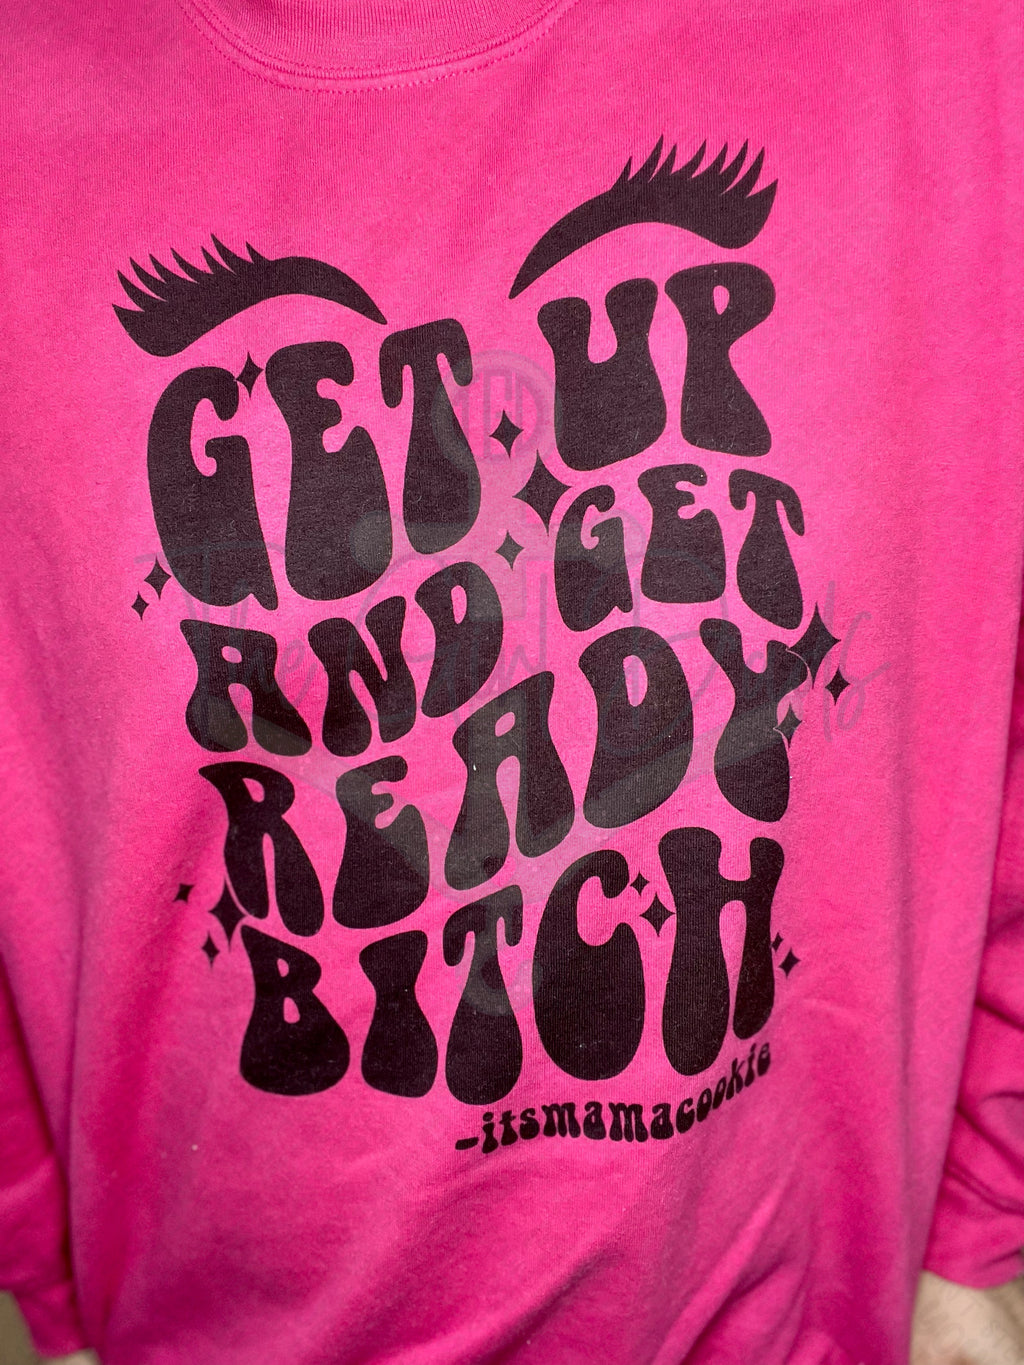 Get Up And Get Ready Bitch Top Design